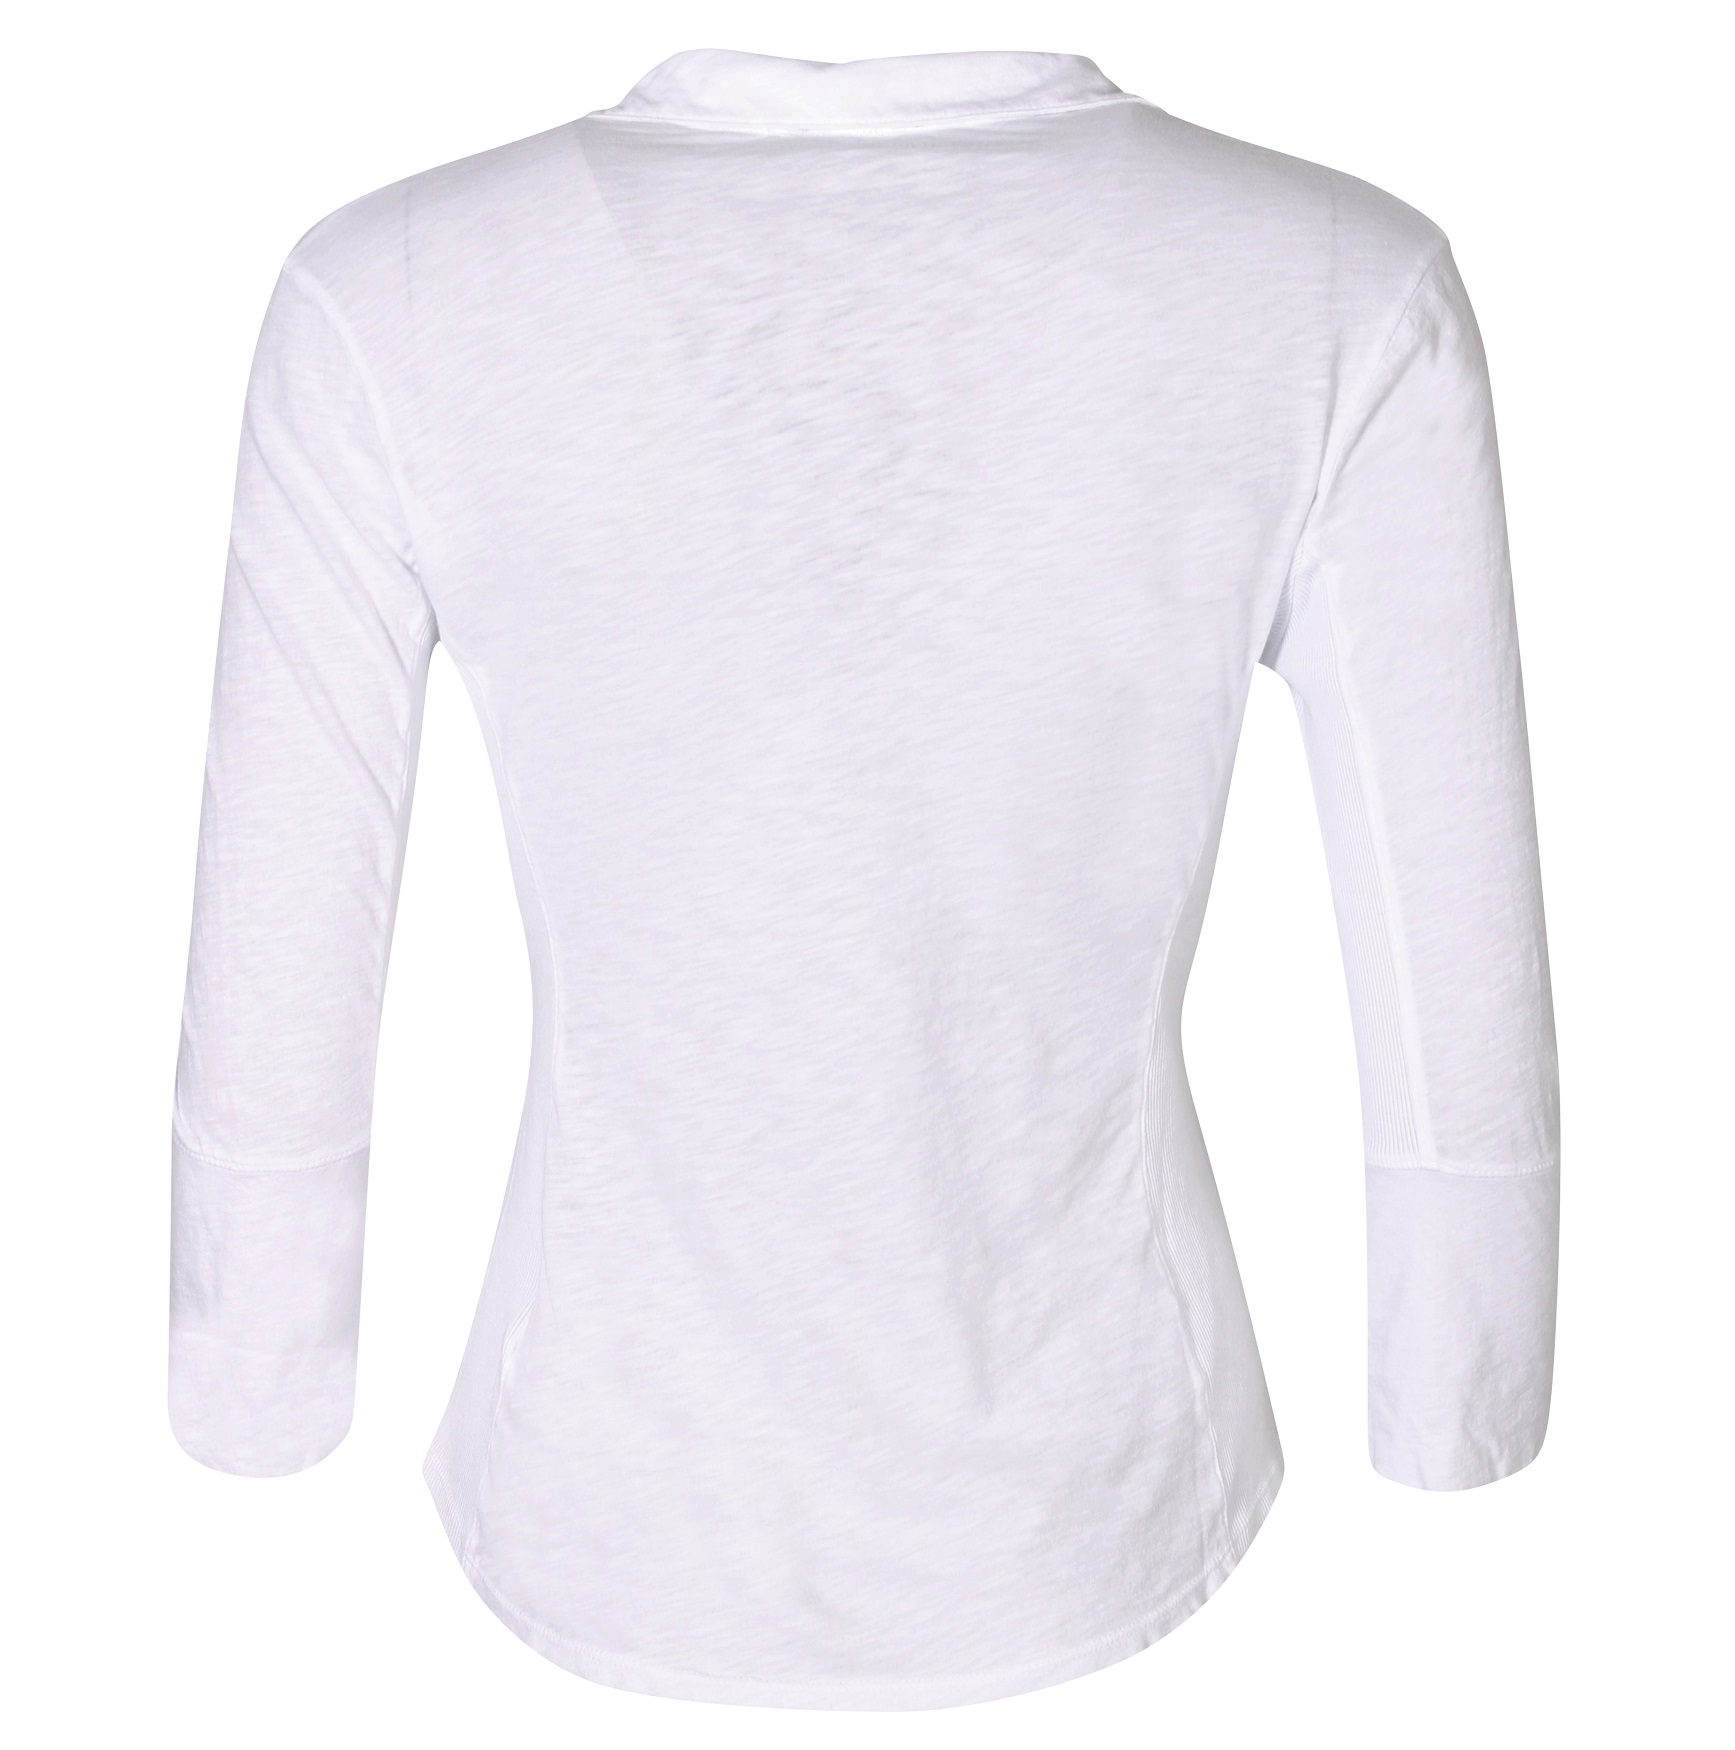 JAMES PERSE Contrast Panel Shirt in White 1/S